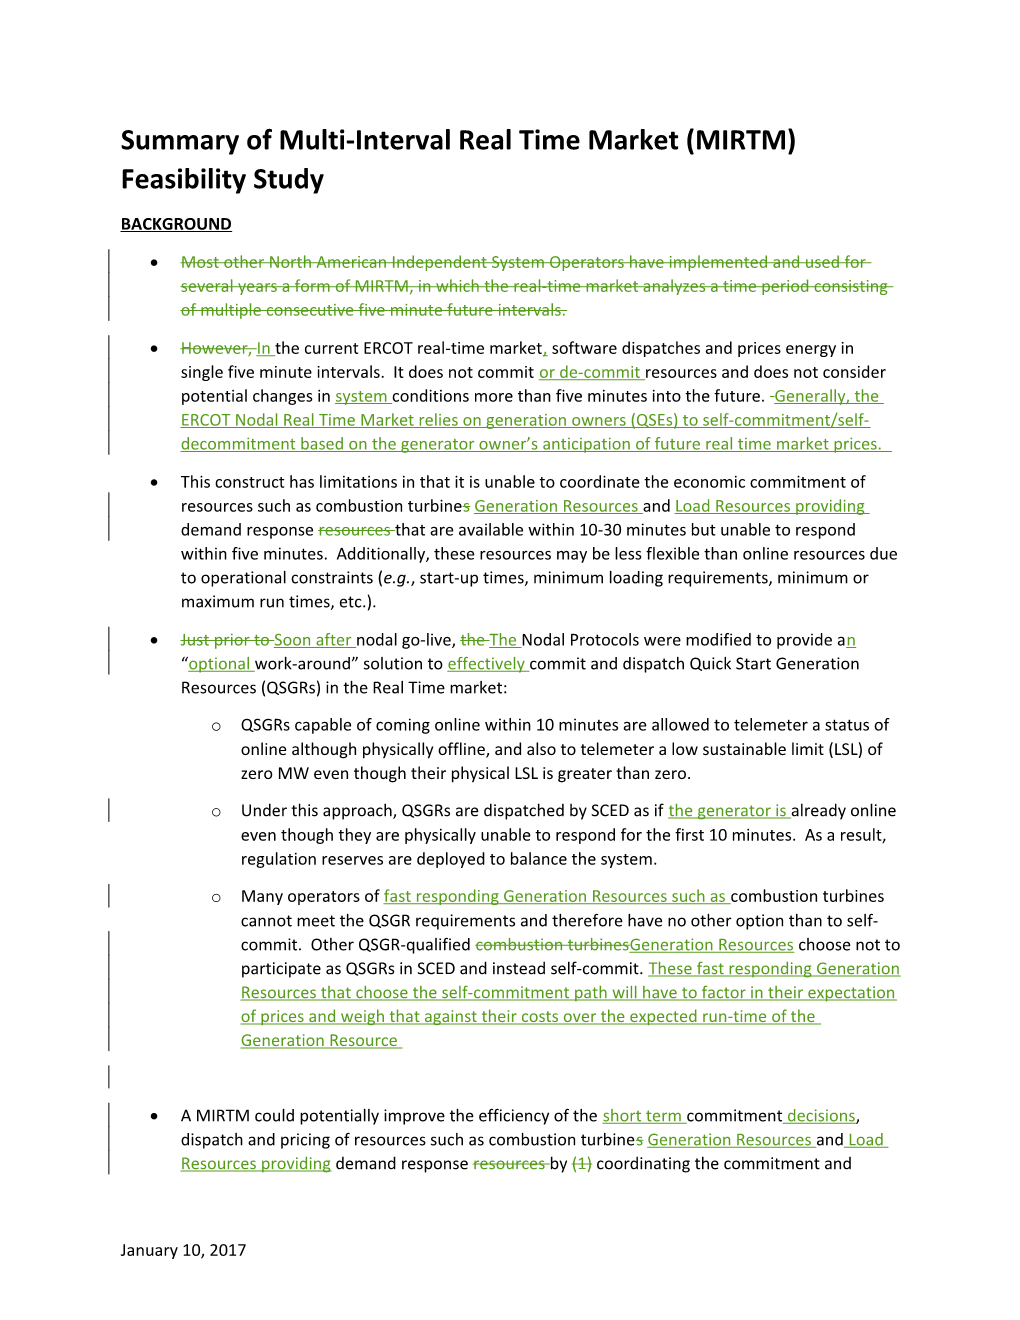 Summary of Multi-Interval Real Time Market (MIRTM) Feasibility Study